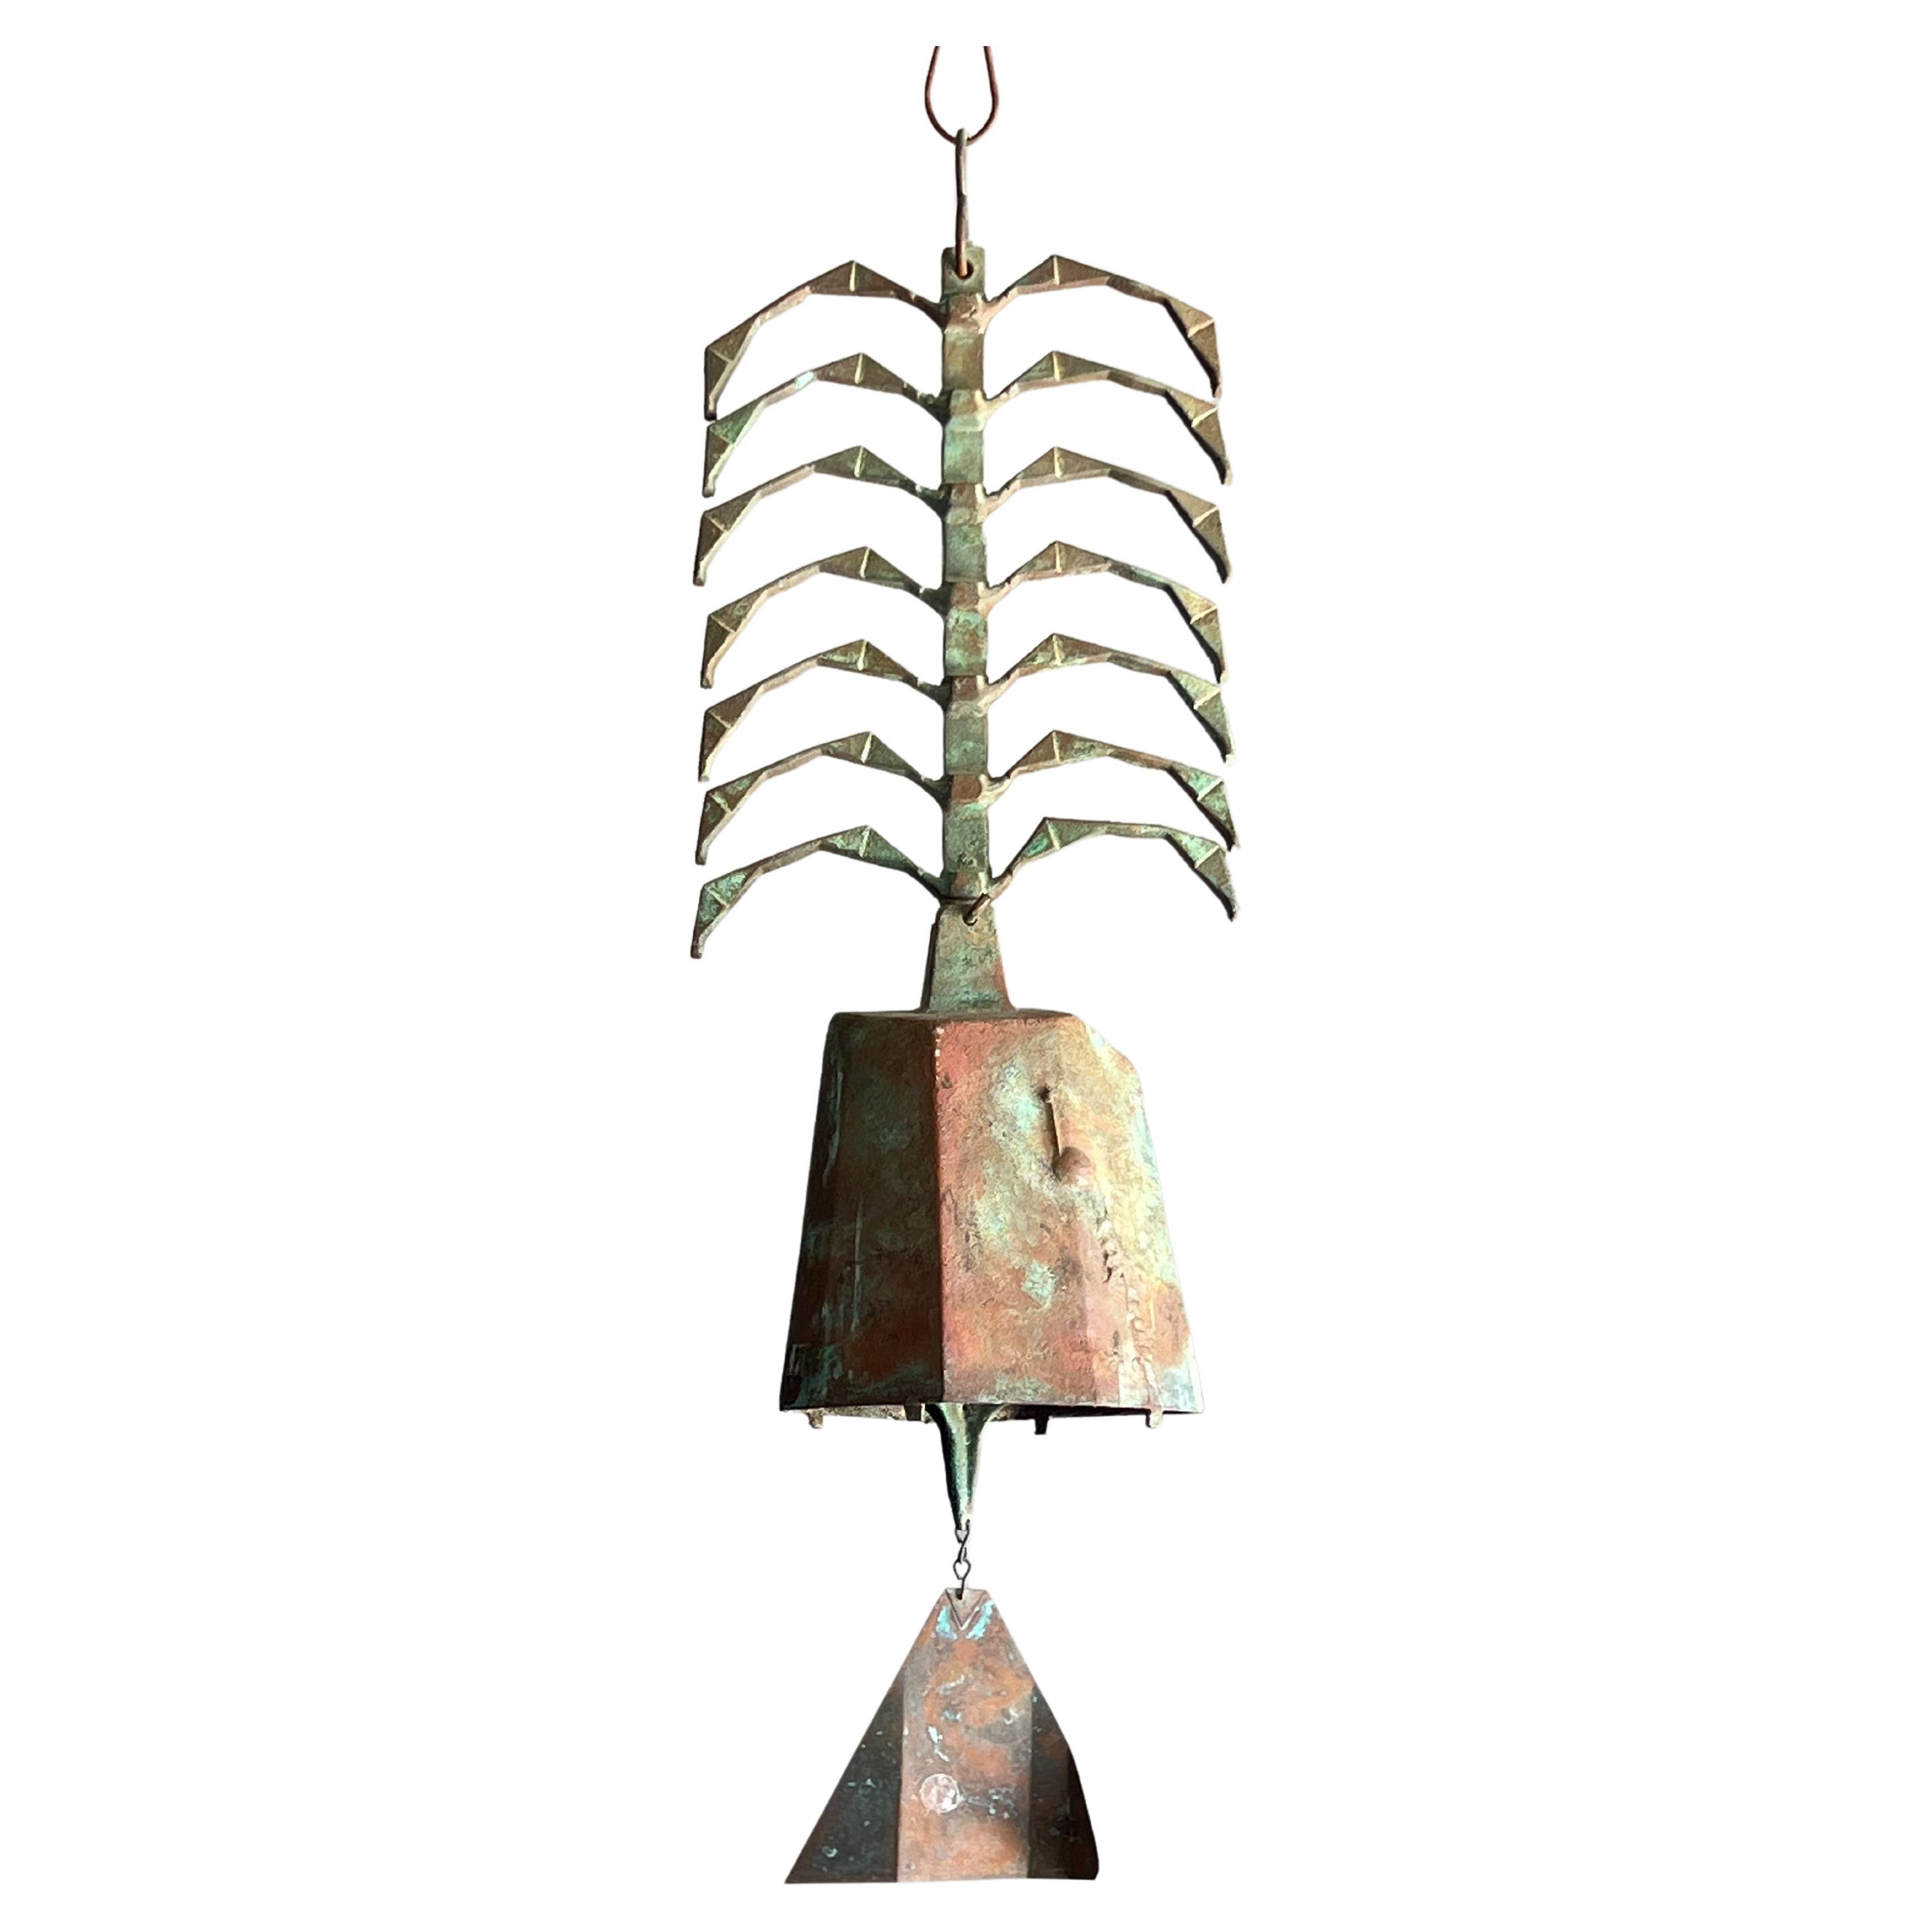 Large Vintage Ribbed Wind Chime/Bell by Paolo Soleri for Arcosanti Bronze 1970s